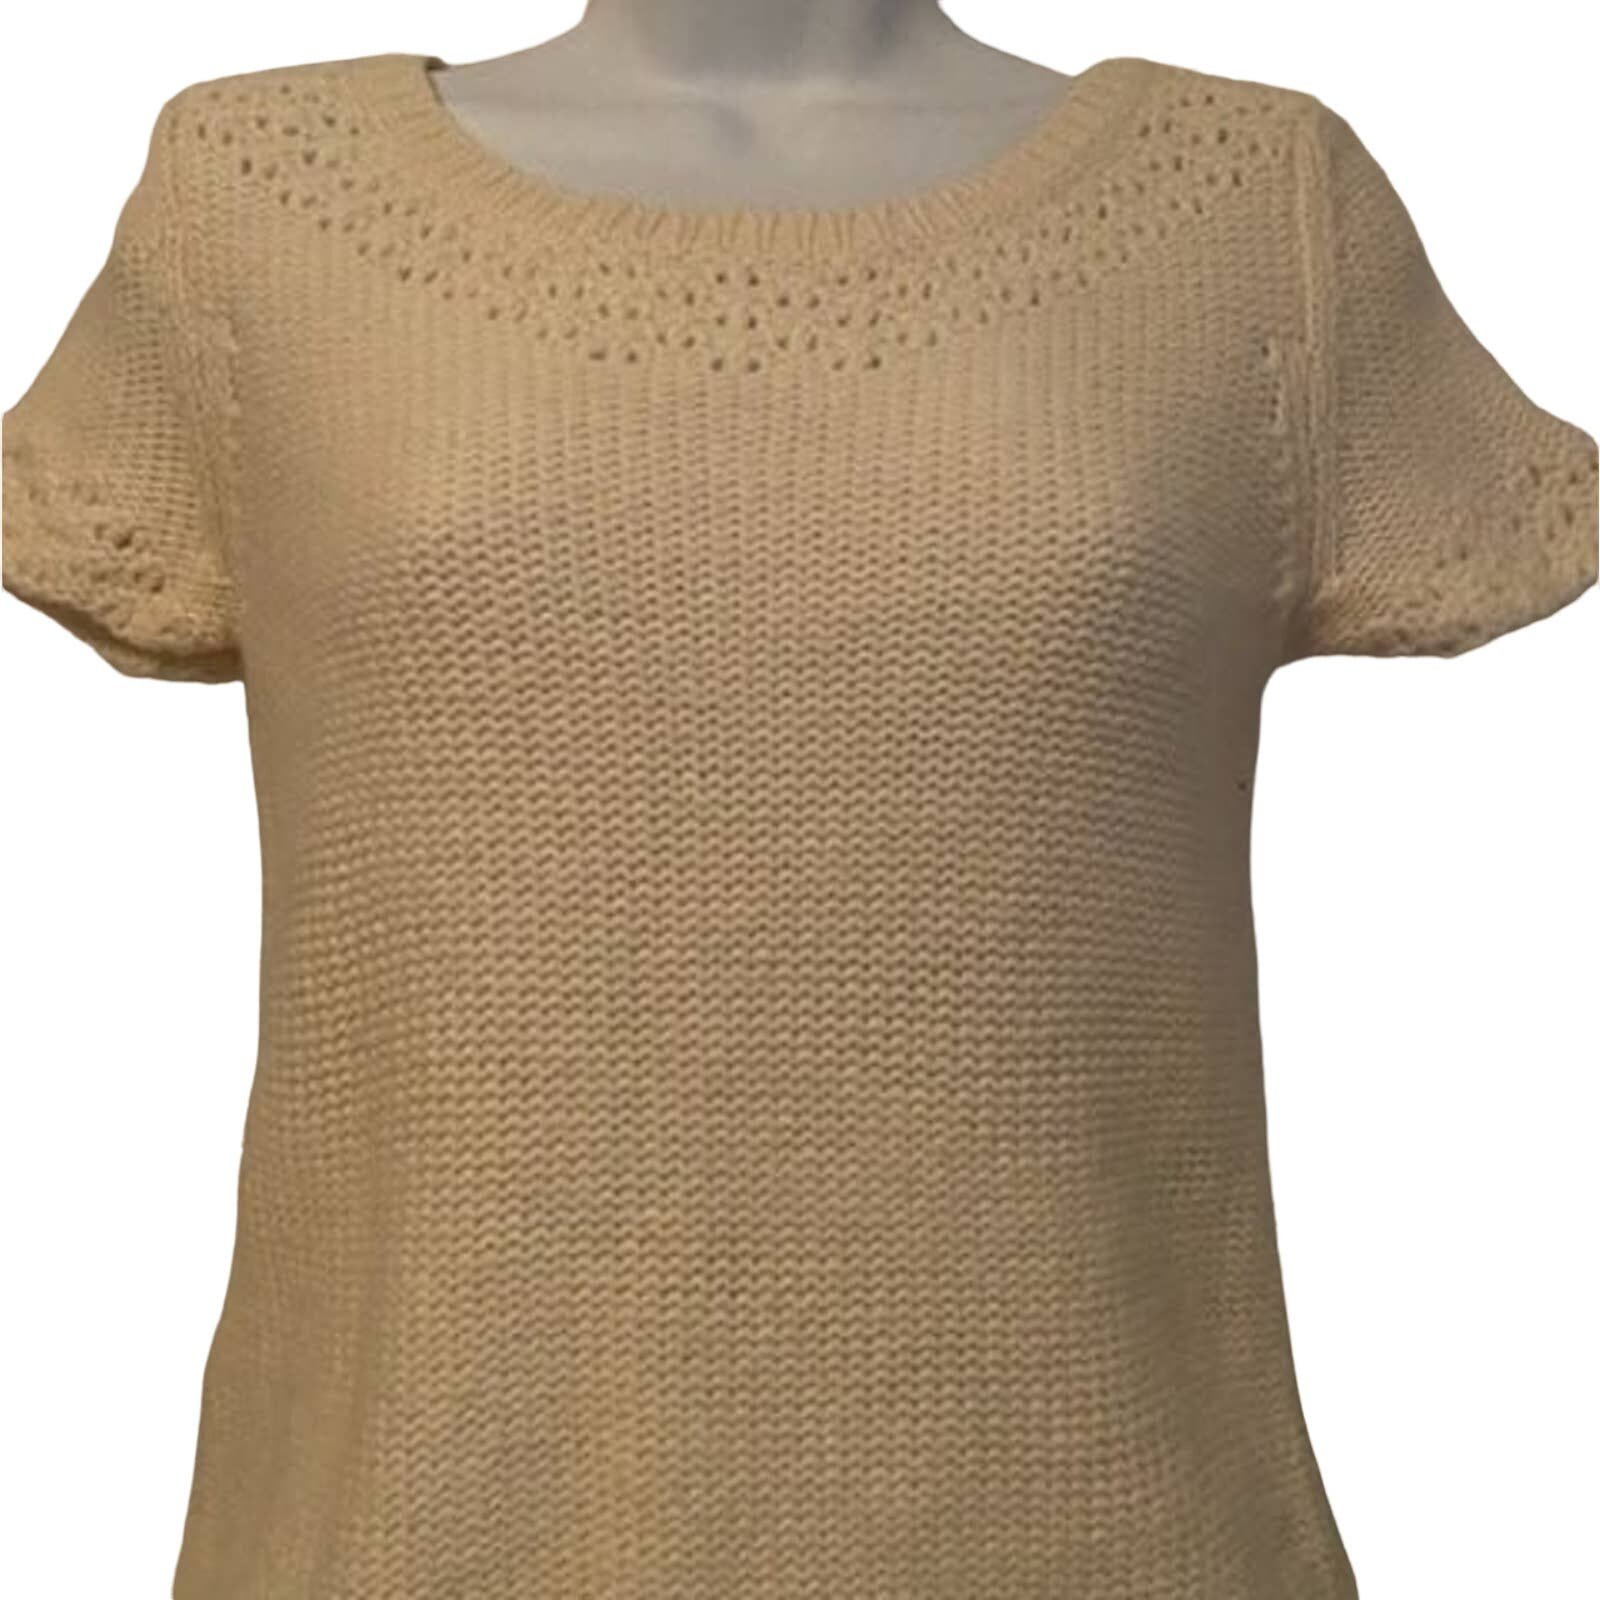 Gorgeous American Eagle Size S Cream Wool Sweater Top NK87XySYR Online Shop